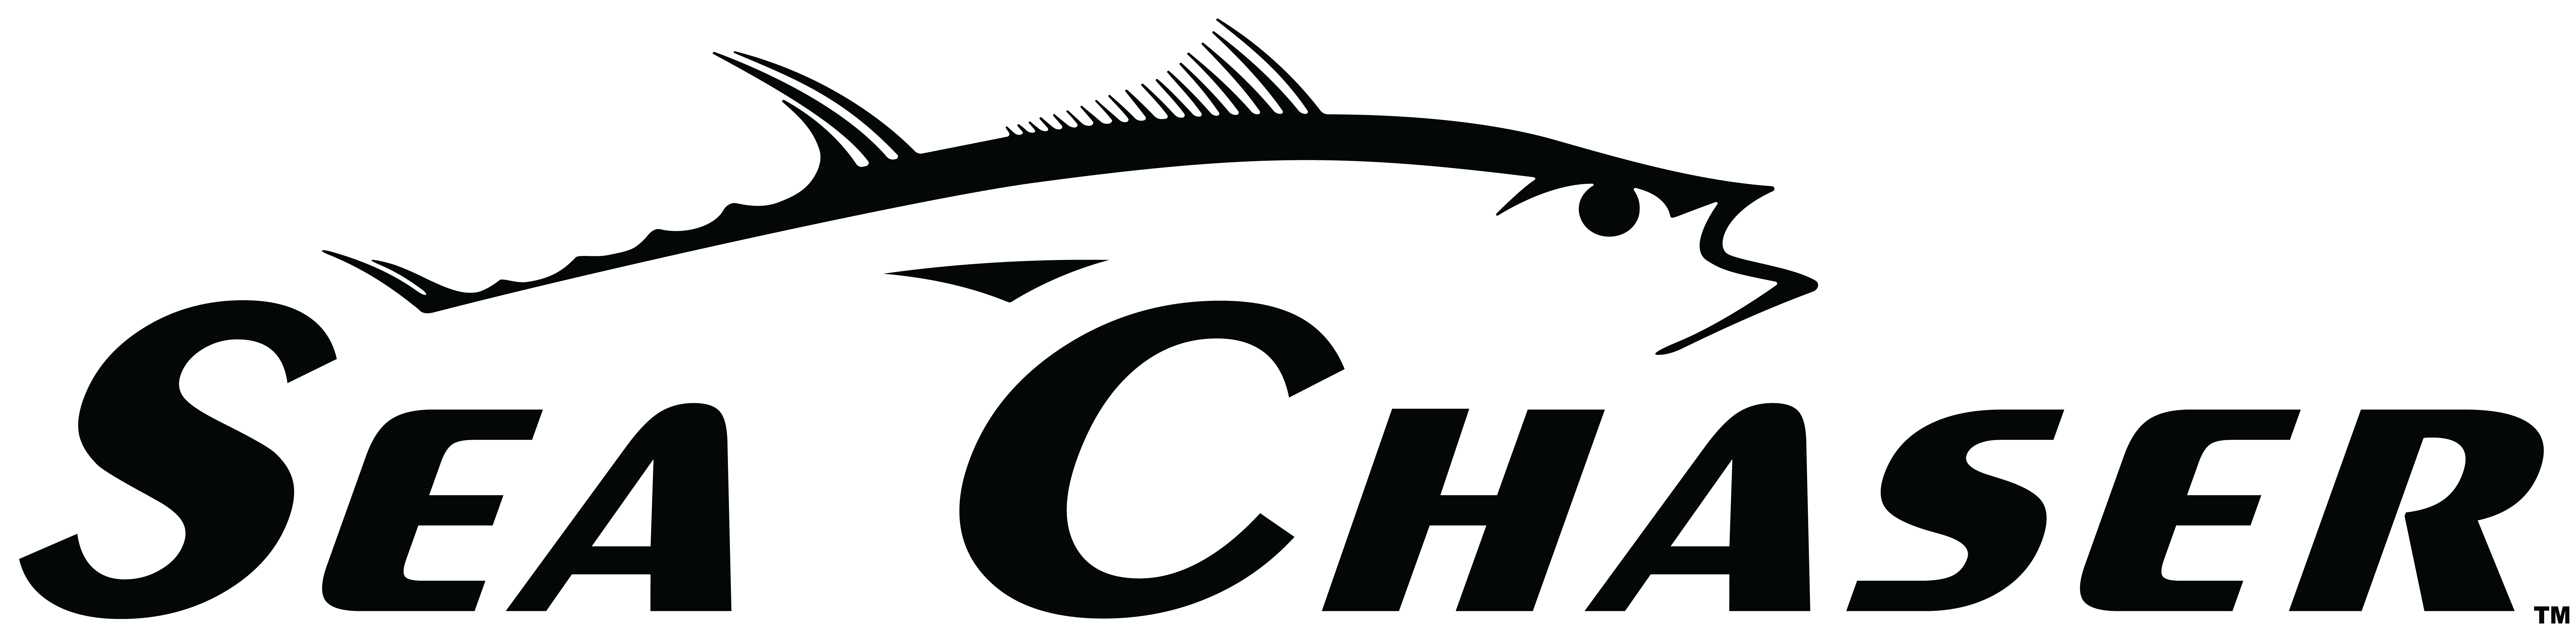 Clearwater Boats Logo